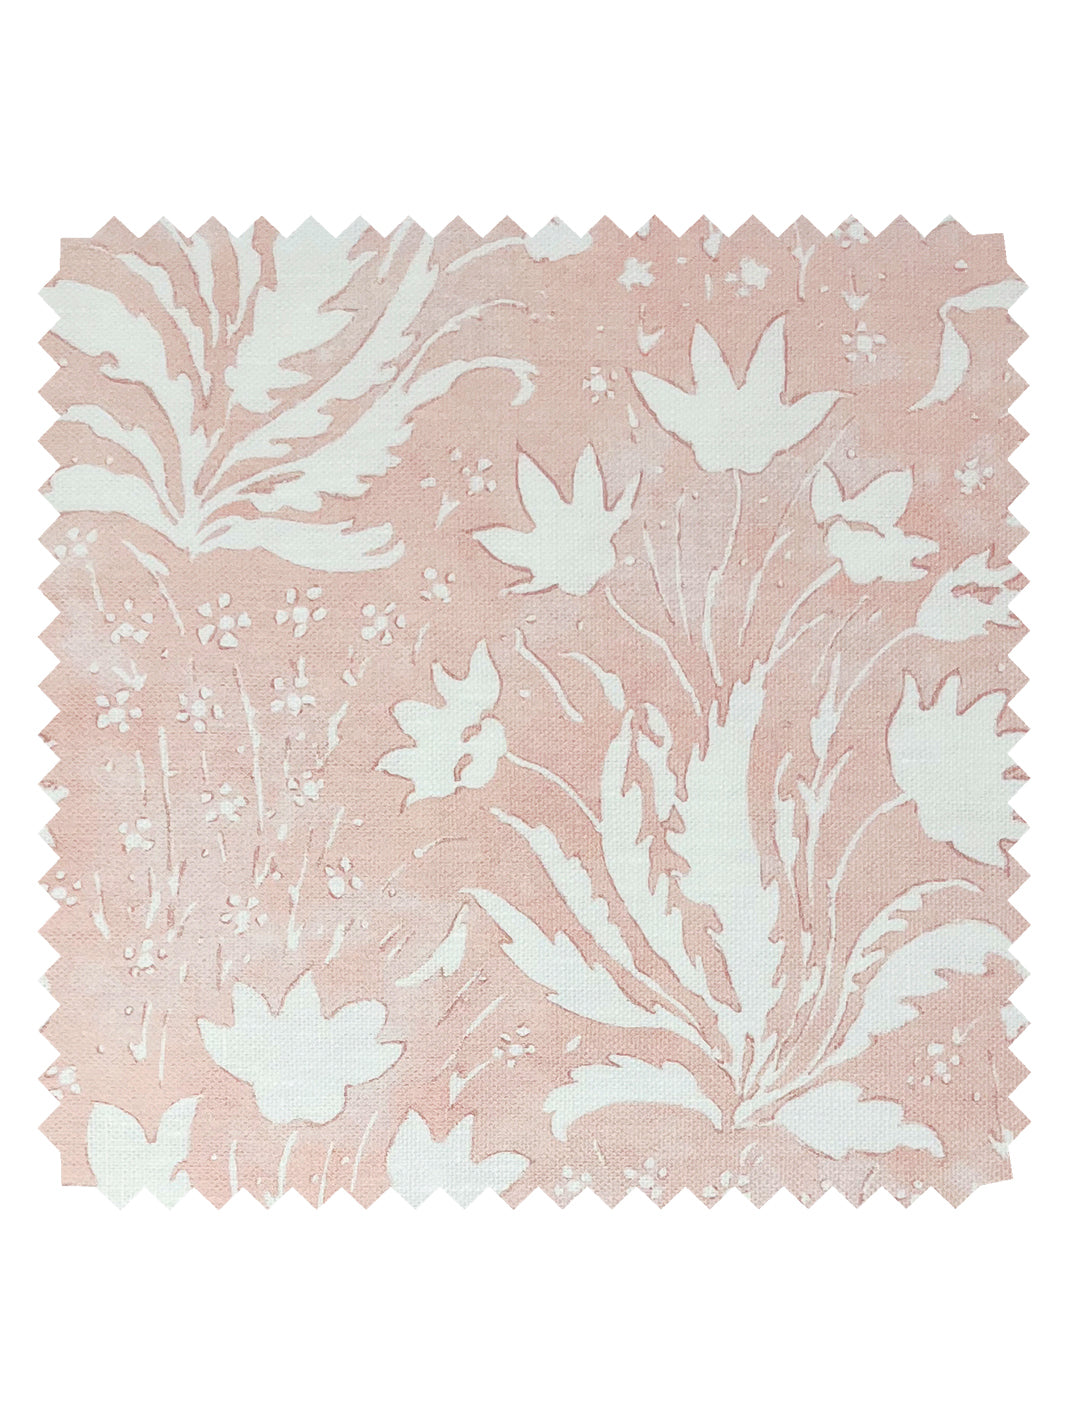 'Hillhouse Floral One Color' Linen Fabric by Nathan Turner - Pink